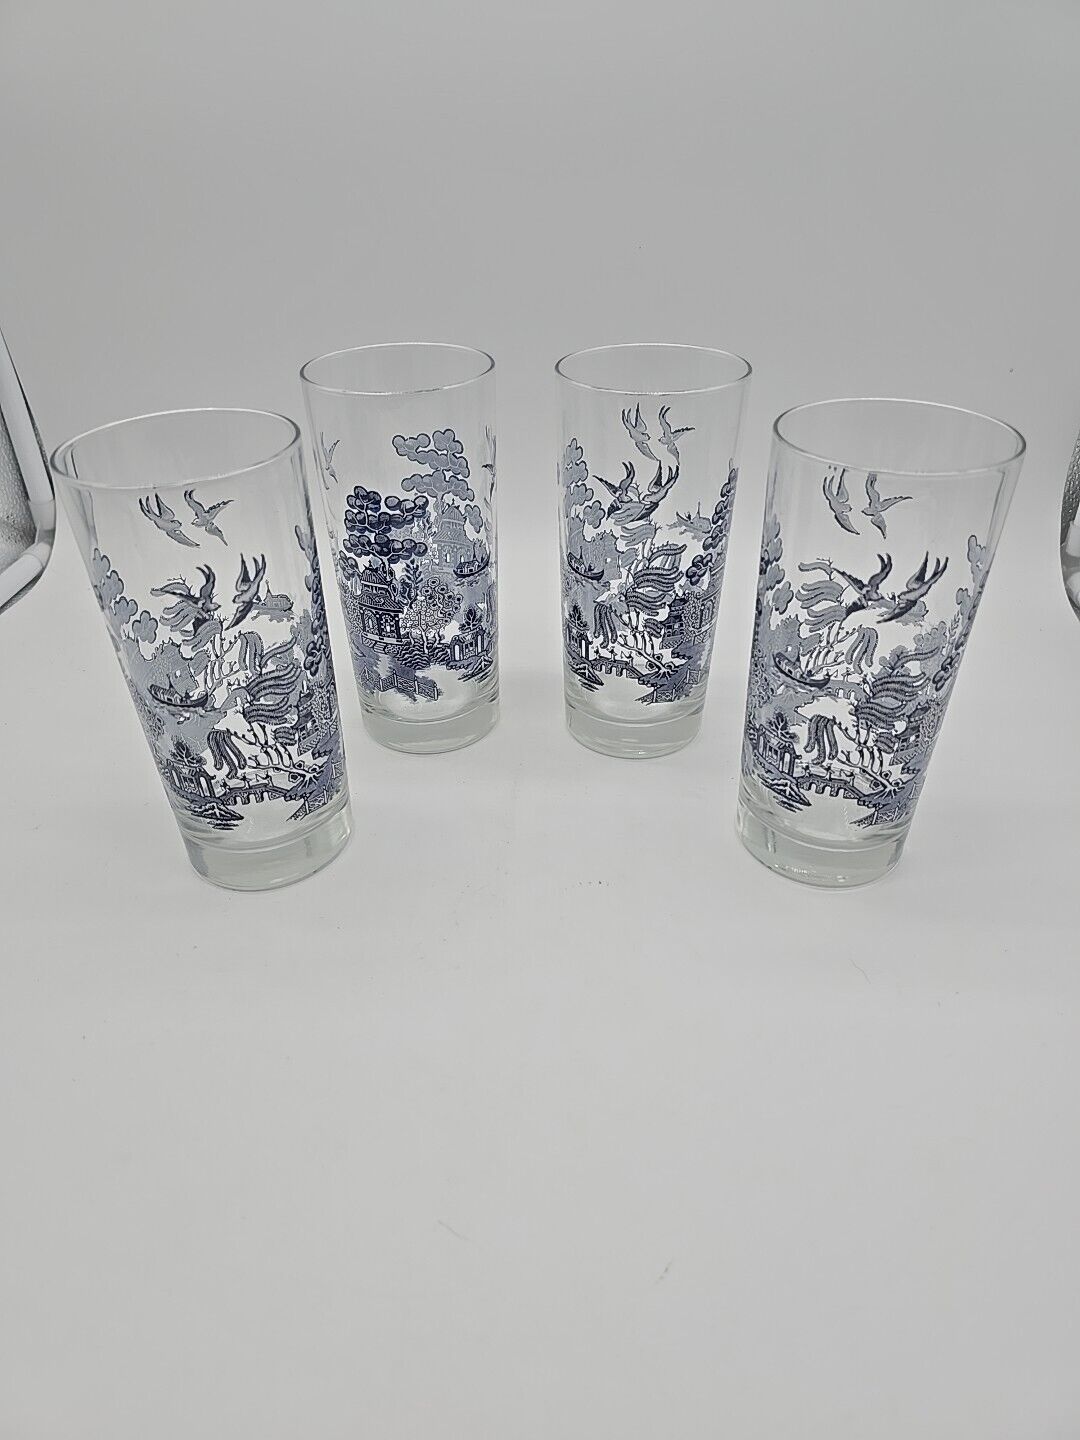 Blue Willow Set of 4 Drinking Tumbler Glasses